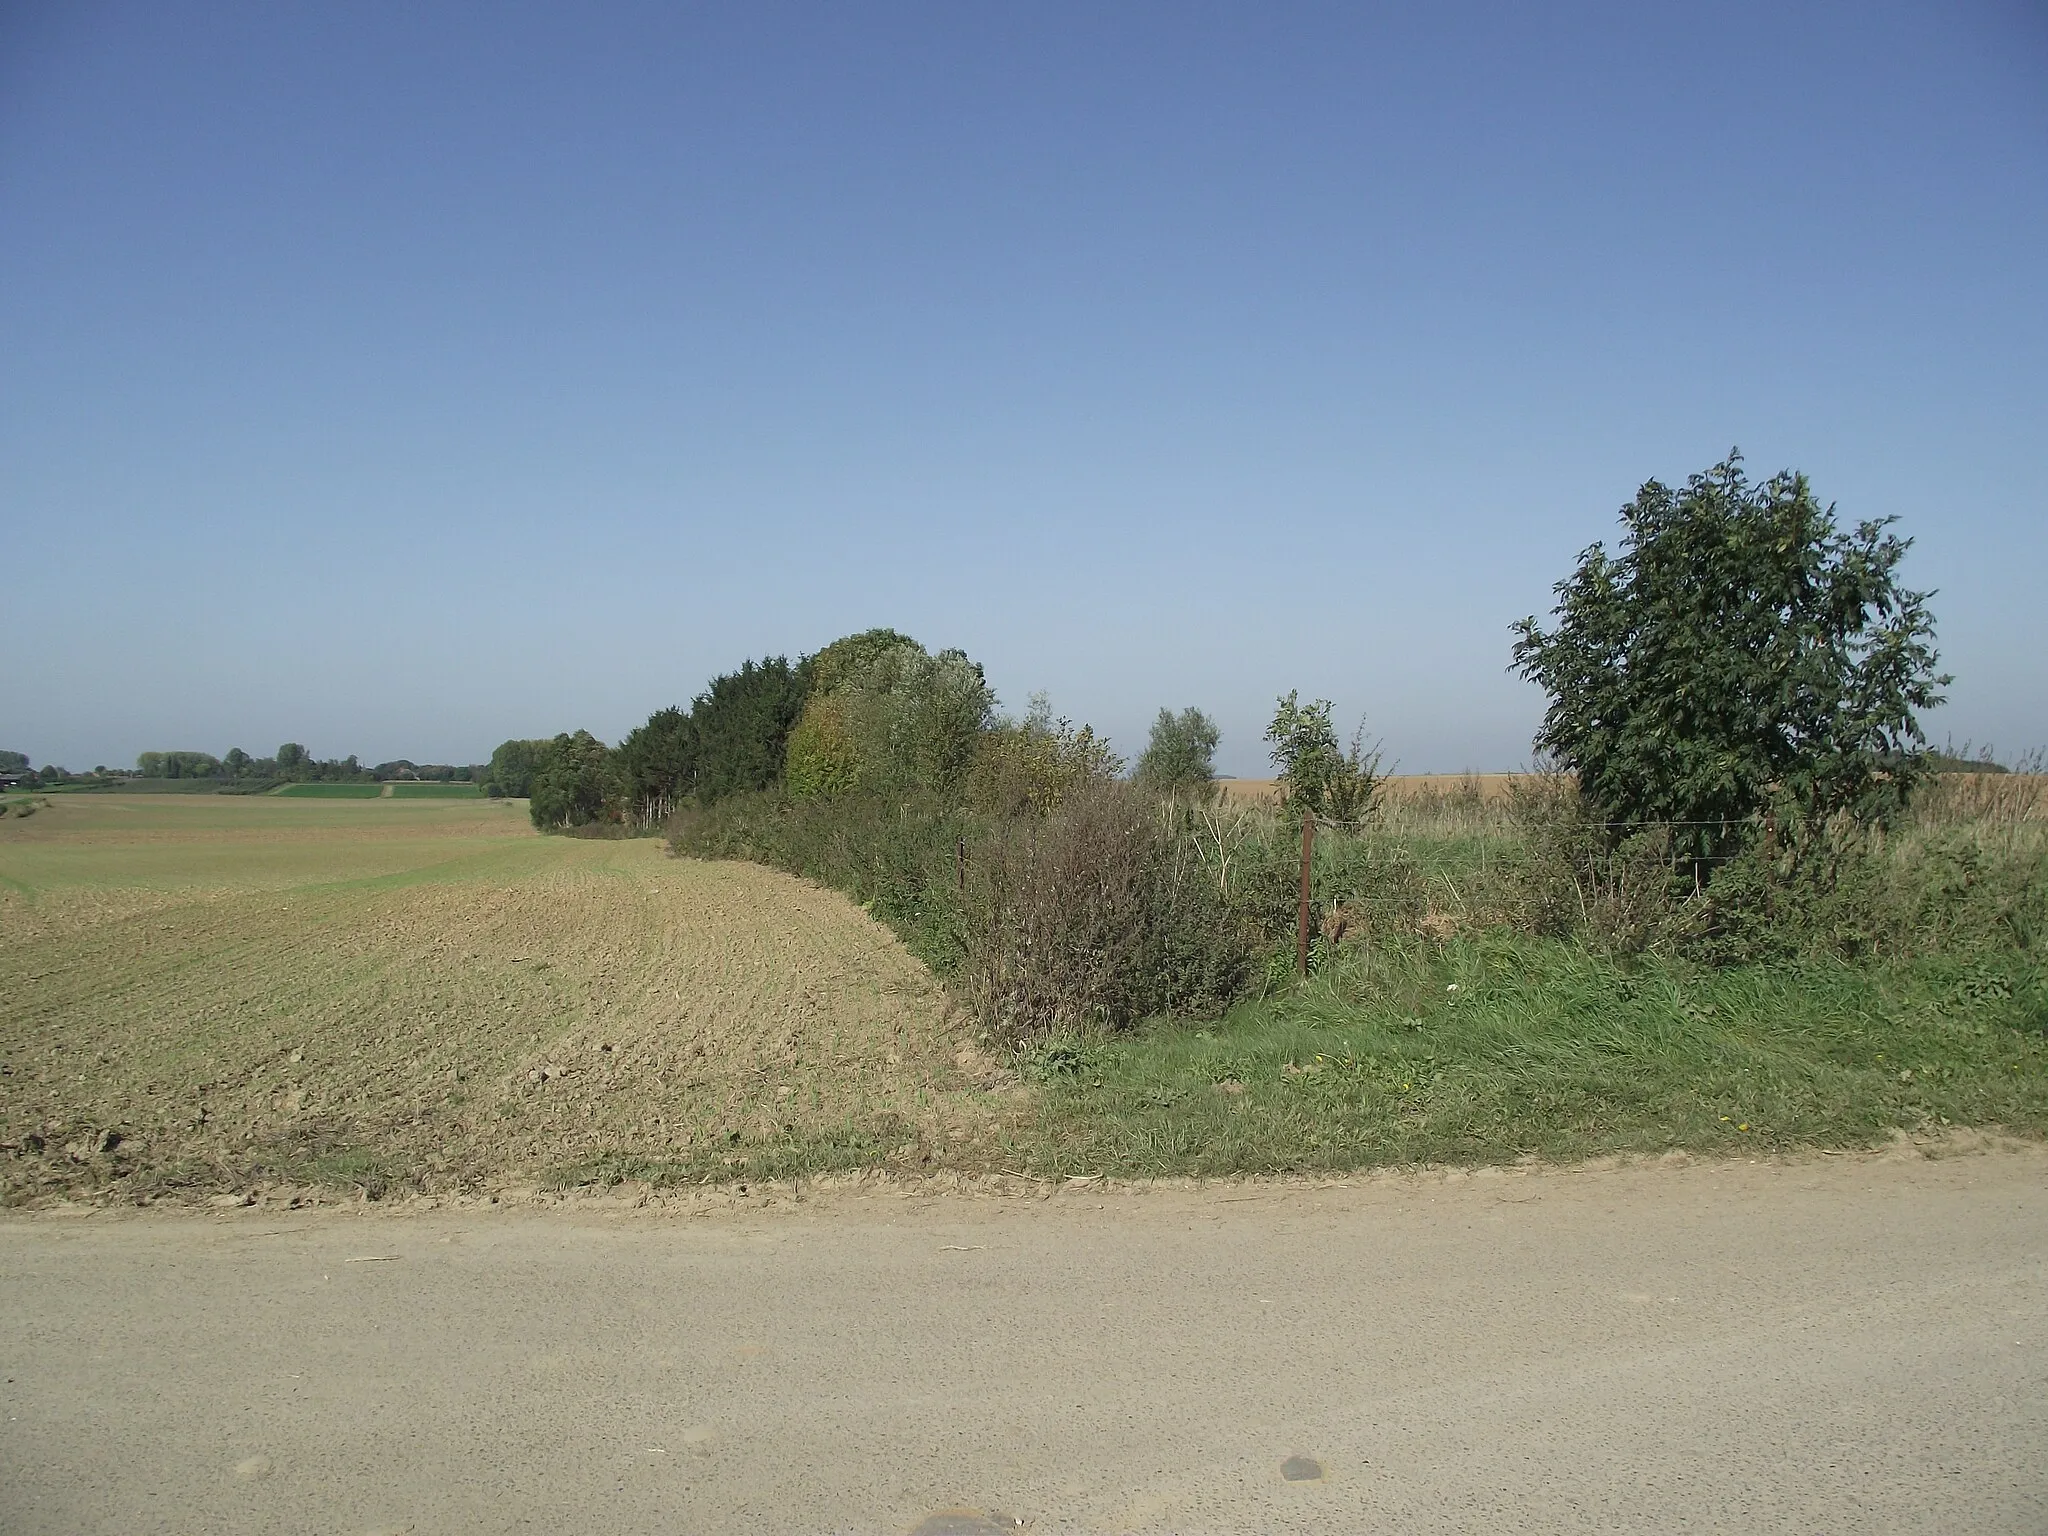 Photo showing: Vicinal railway trace in the direction of Ambresin. It follows the plowed field.